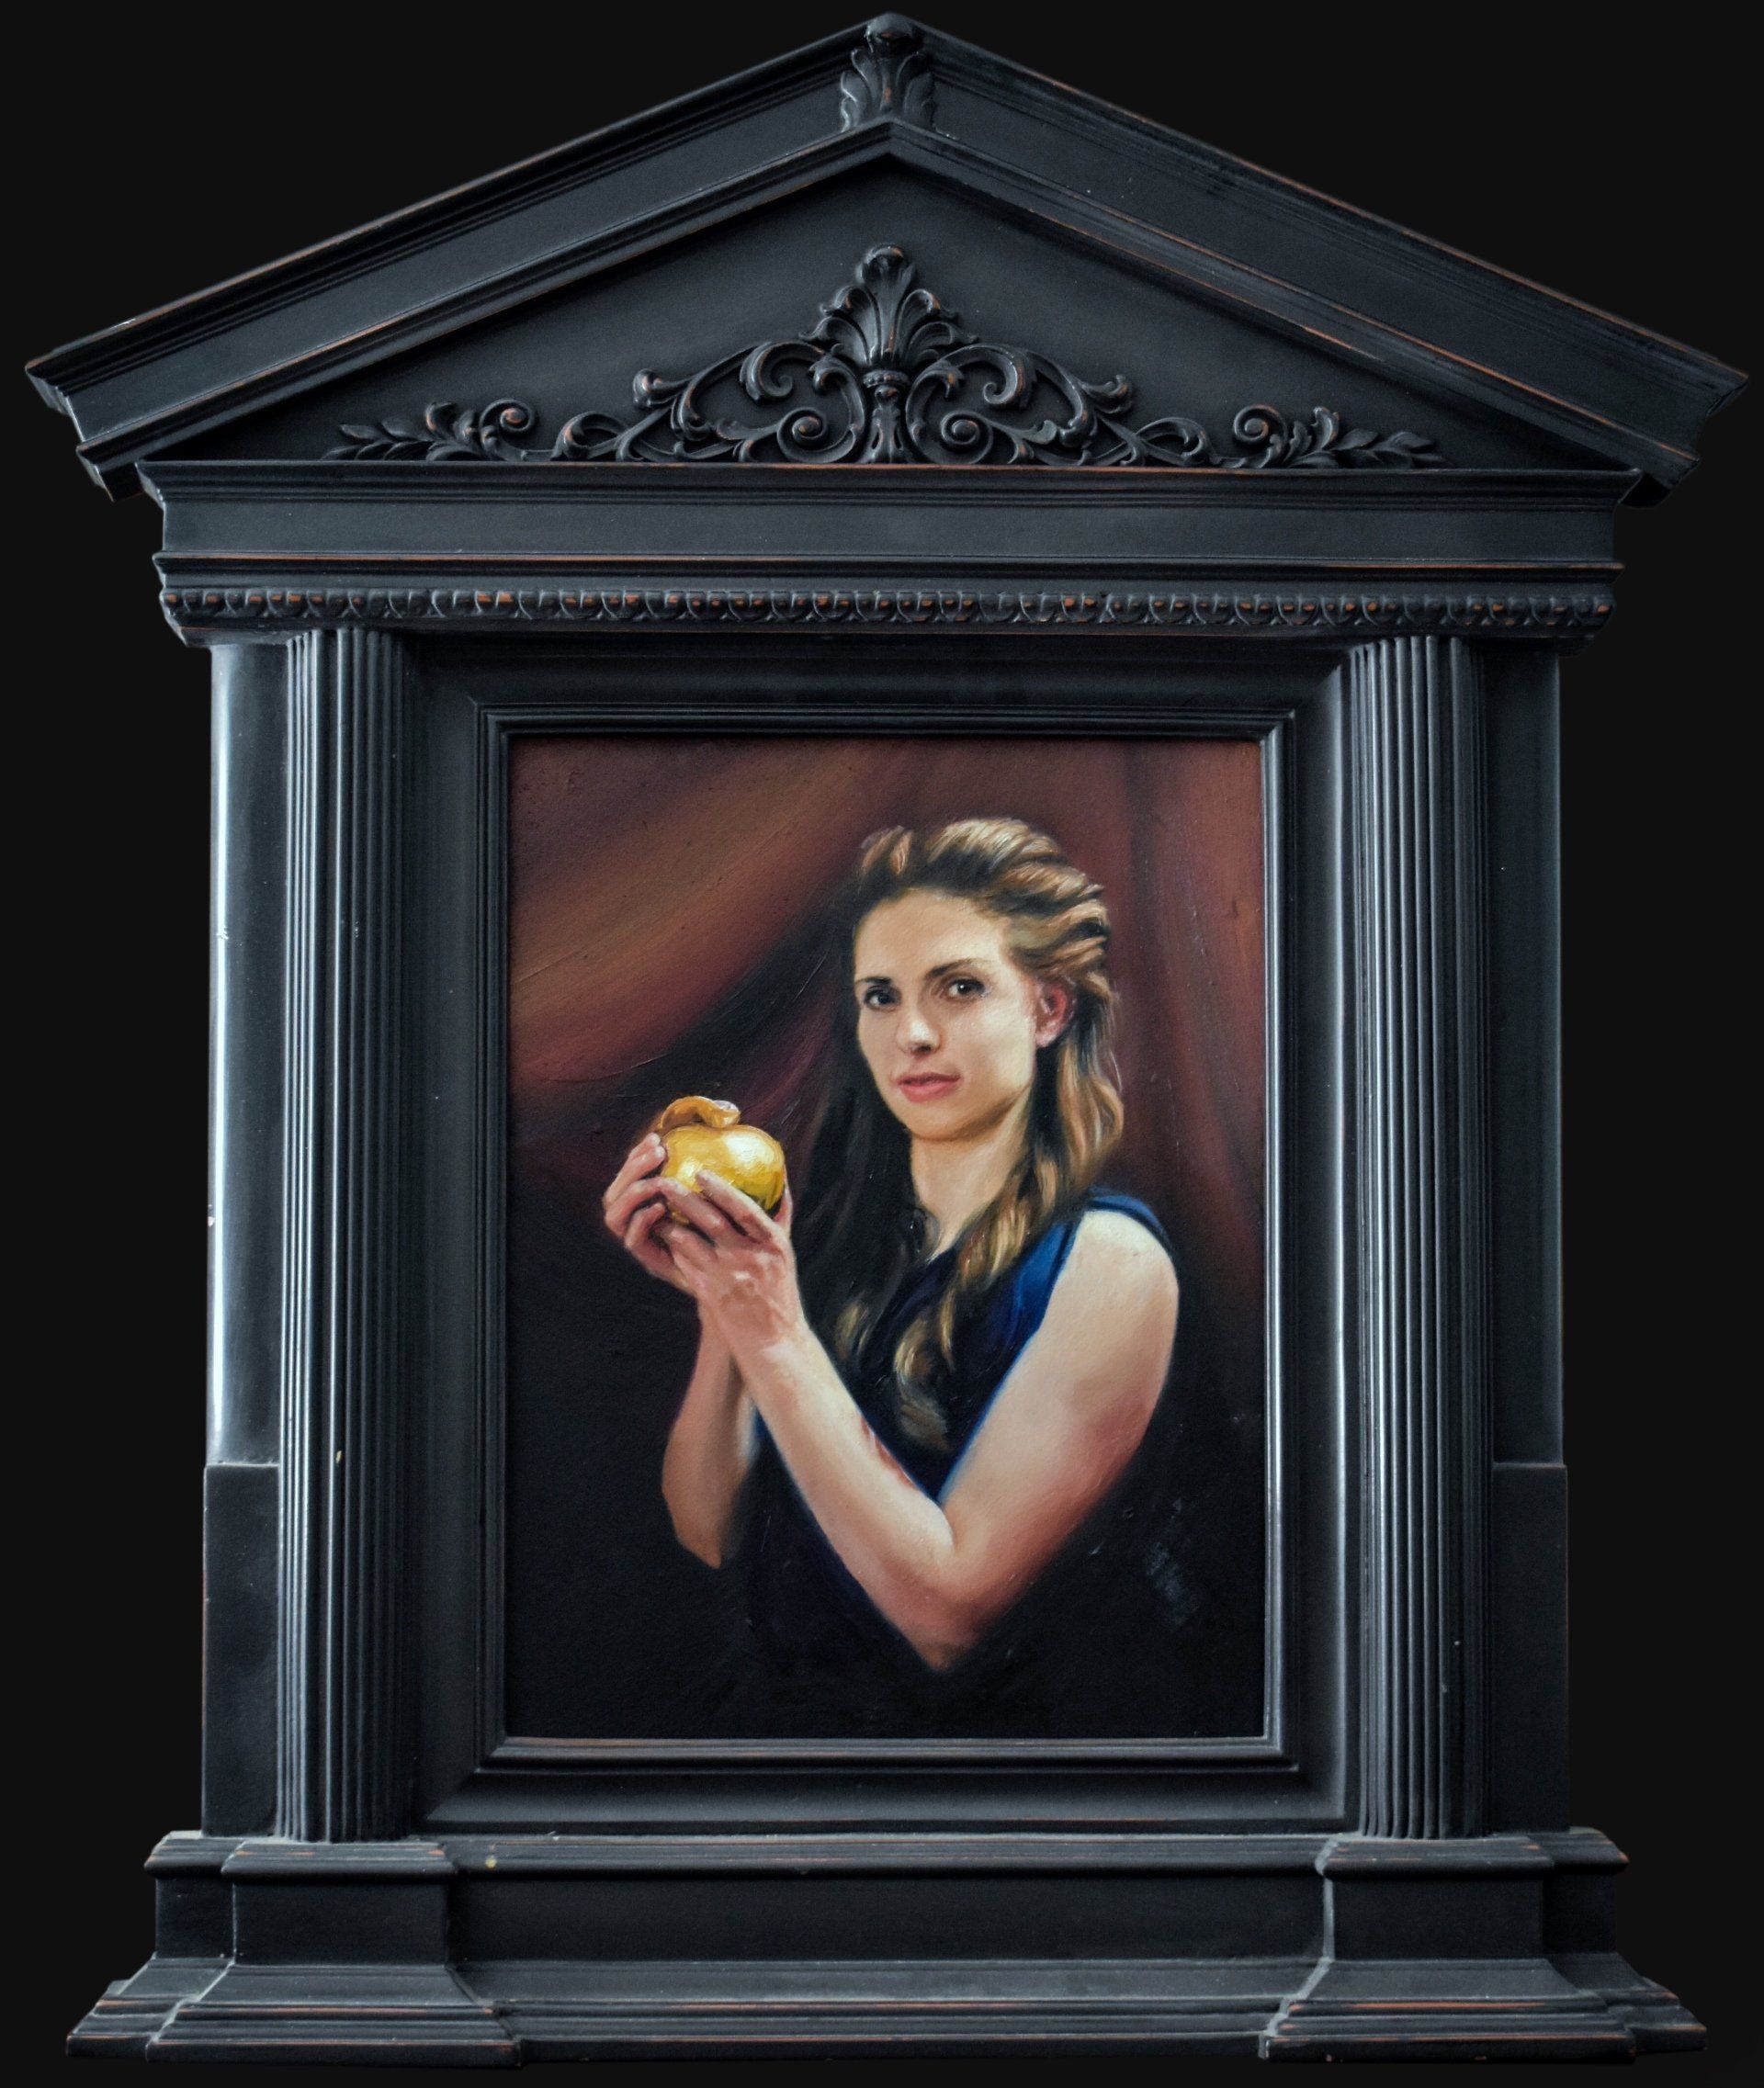 A painting of a woman holding a gold object in a black frame